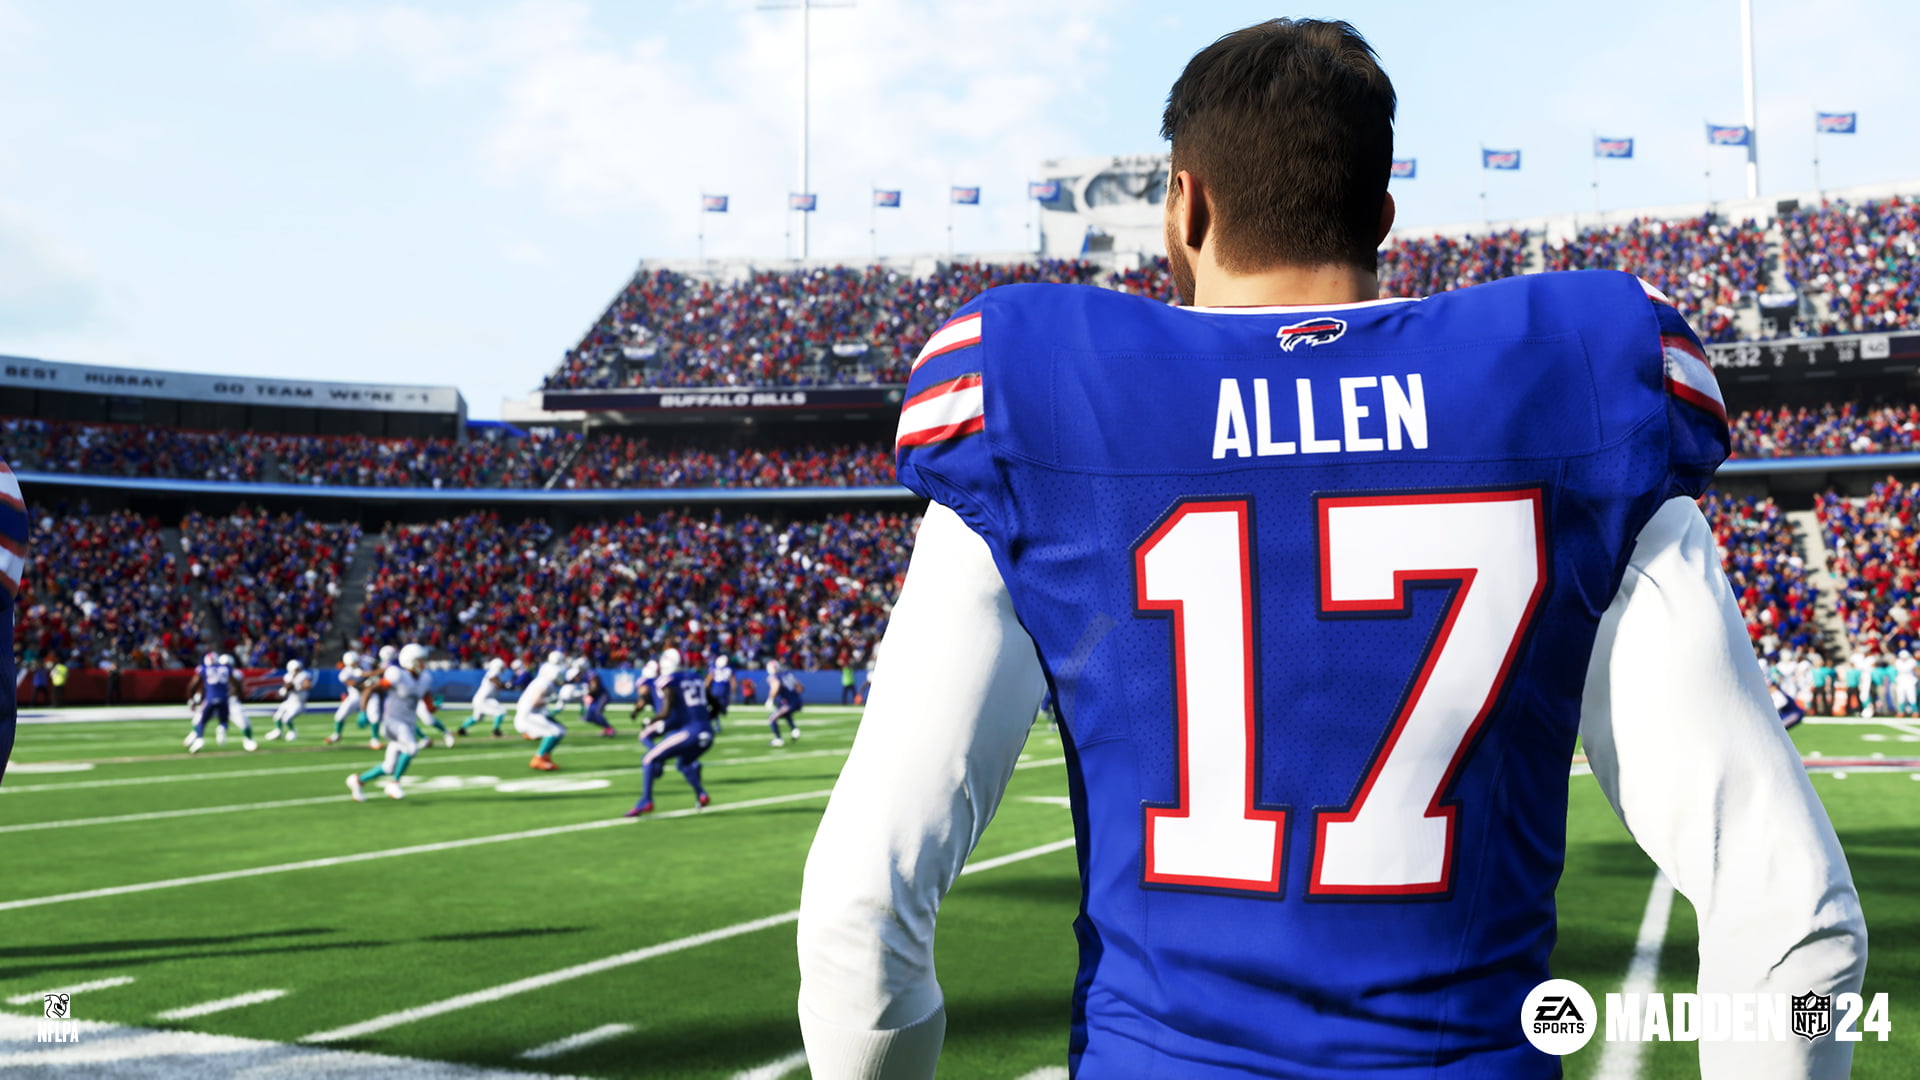 Madden NFL 23 gameplay changes, cover photo, pre-order details and